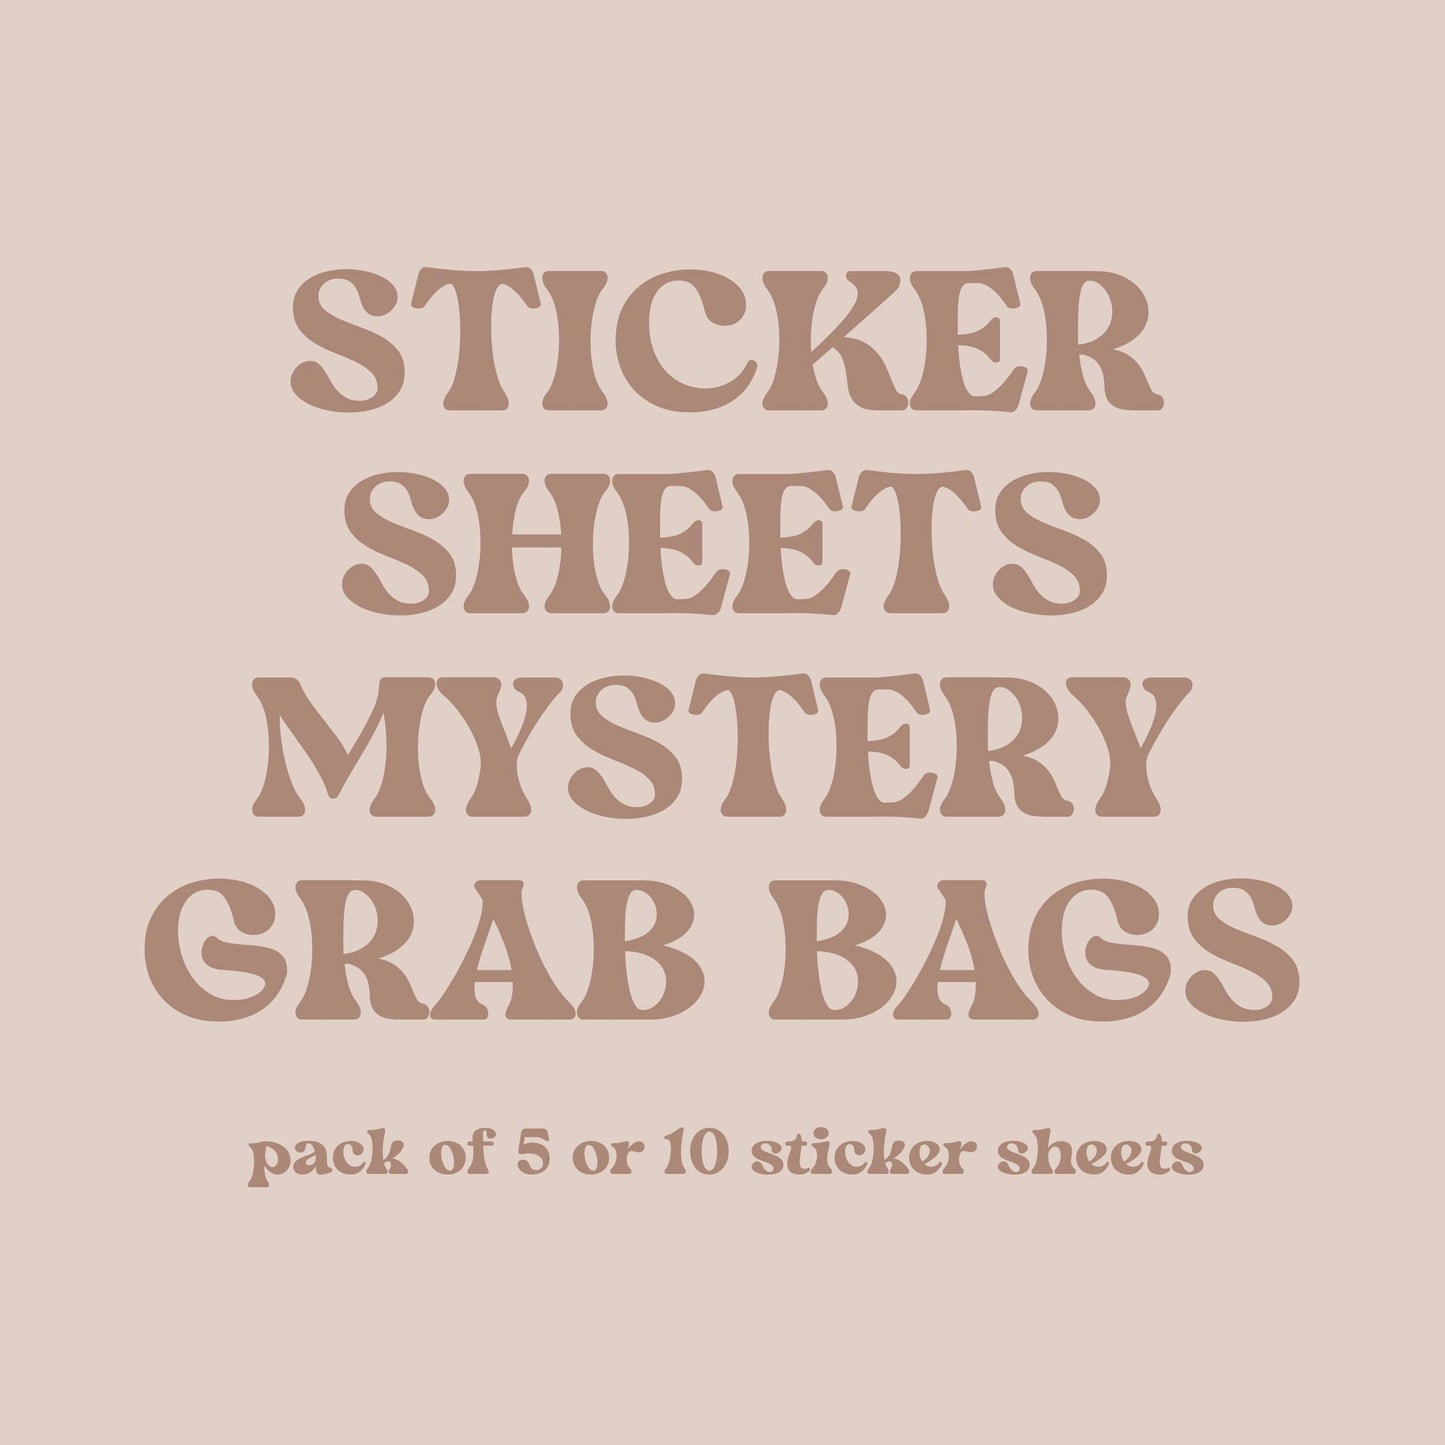 Sticker Sheets Mystery Bag